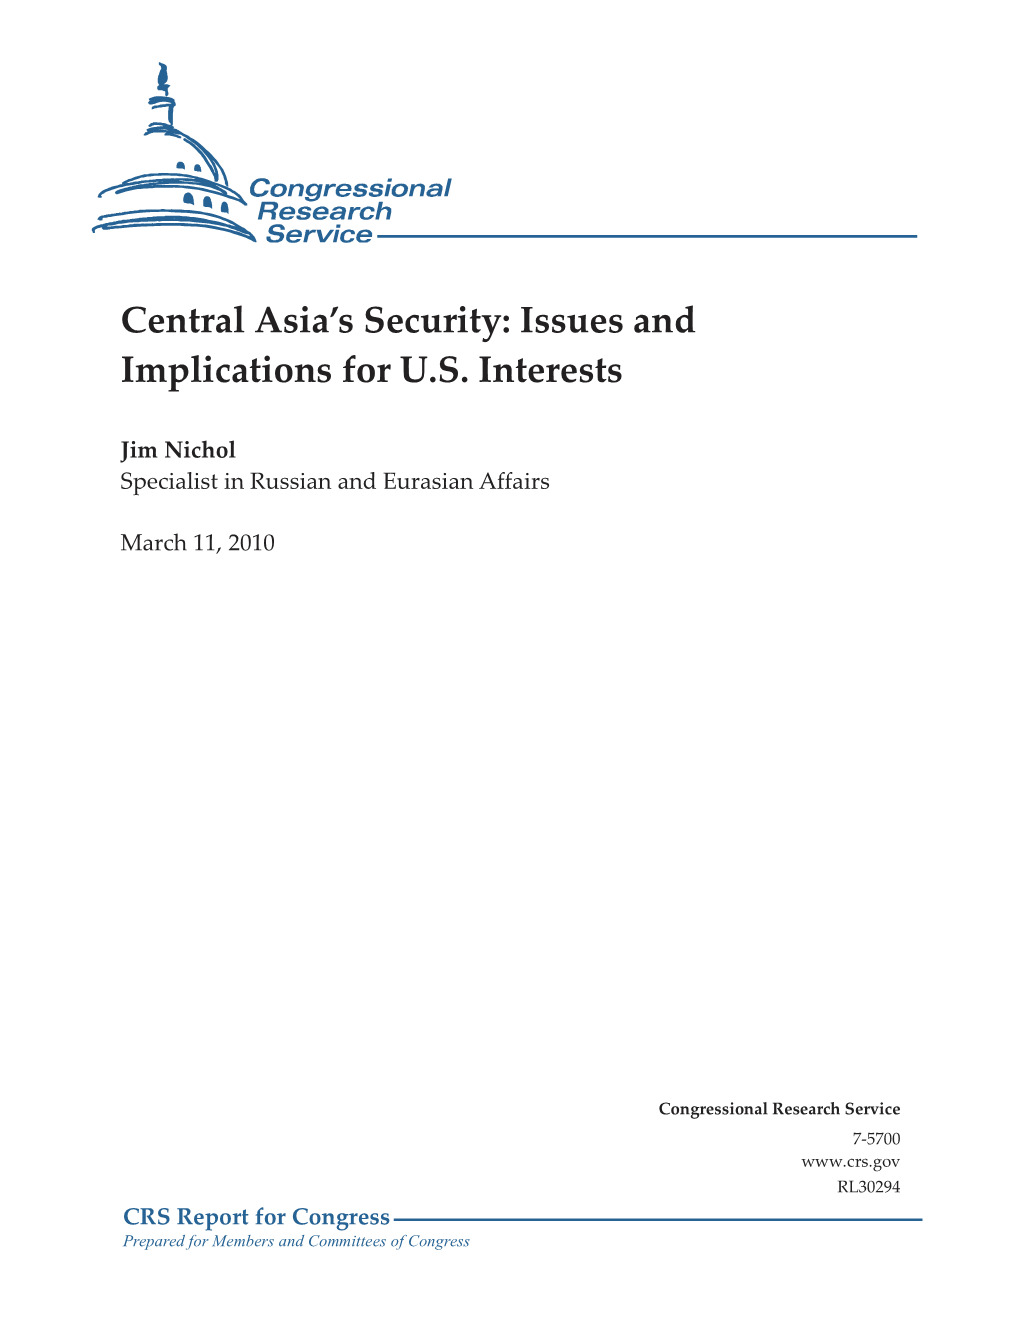 Central Asia's Security: Issues and Implications for U.S. Interests